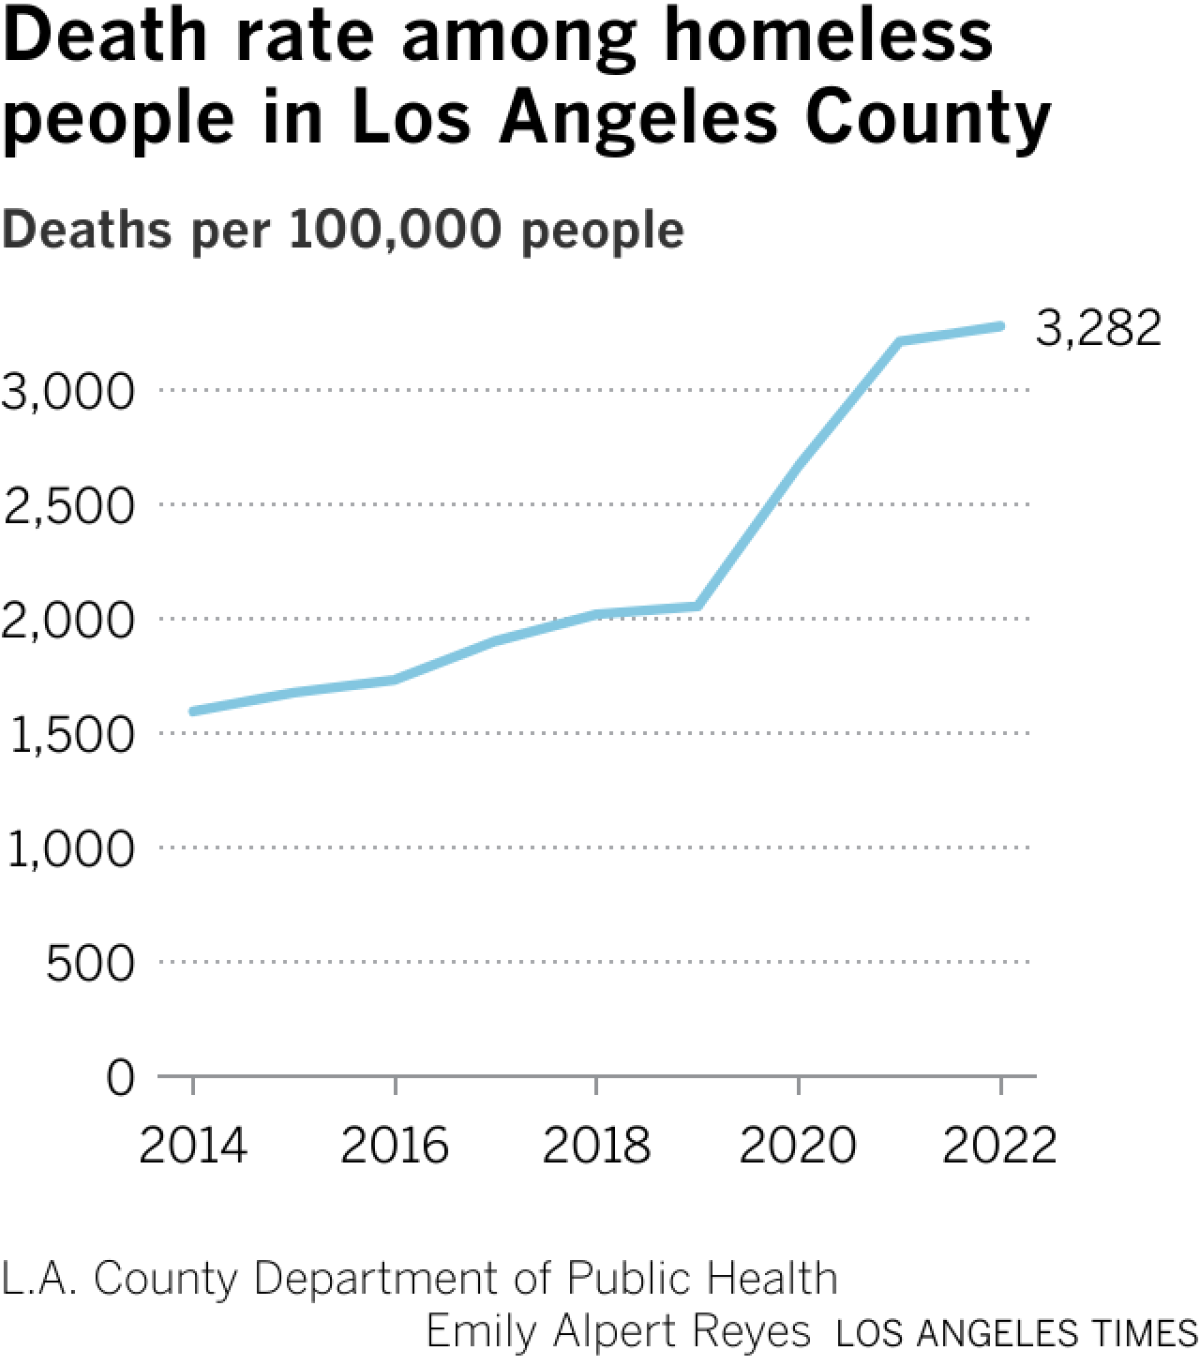 Line chart shows the mortality rate per 100,000 unhoused people in Los Angeles County. It began to flatten in 2022 after years of increases.